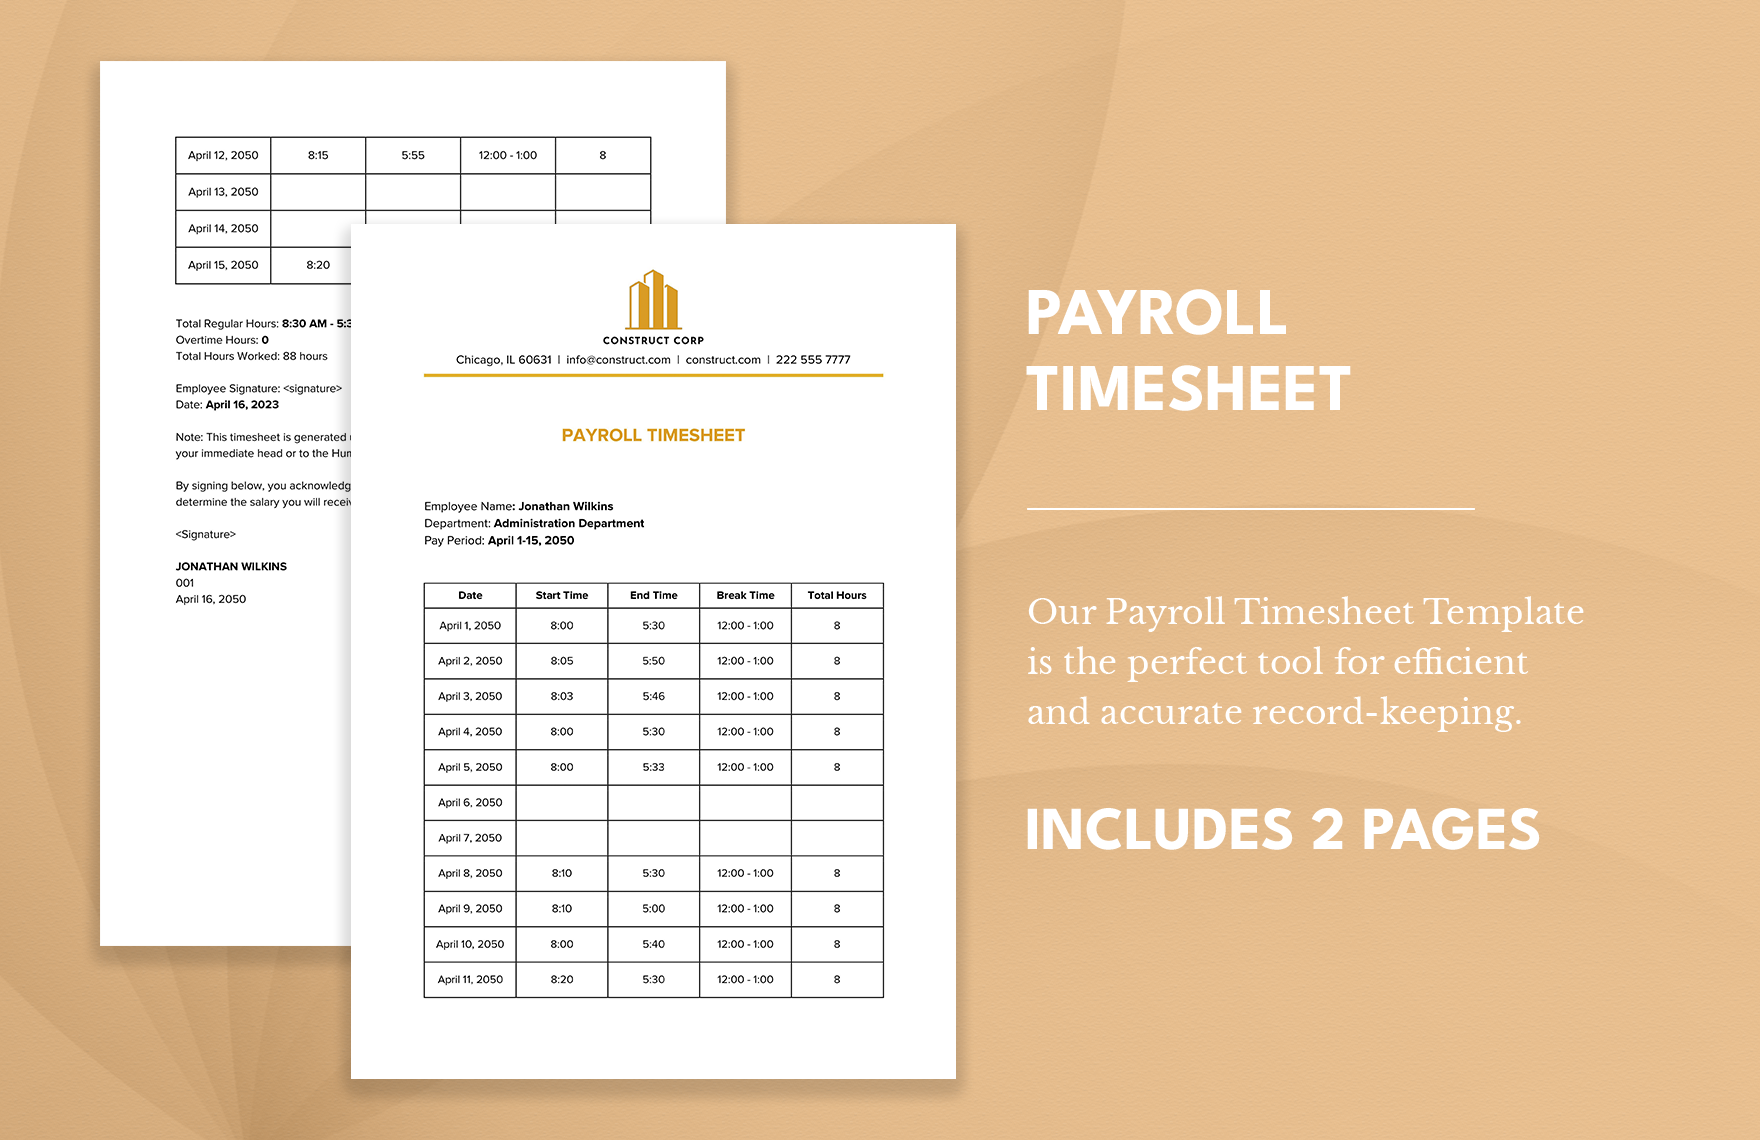 Payroll Timesheet in Word, Google Docs, Apple Pages